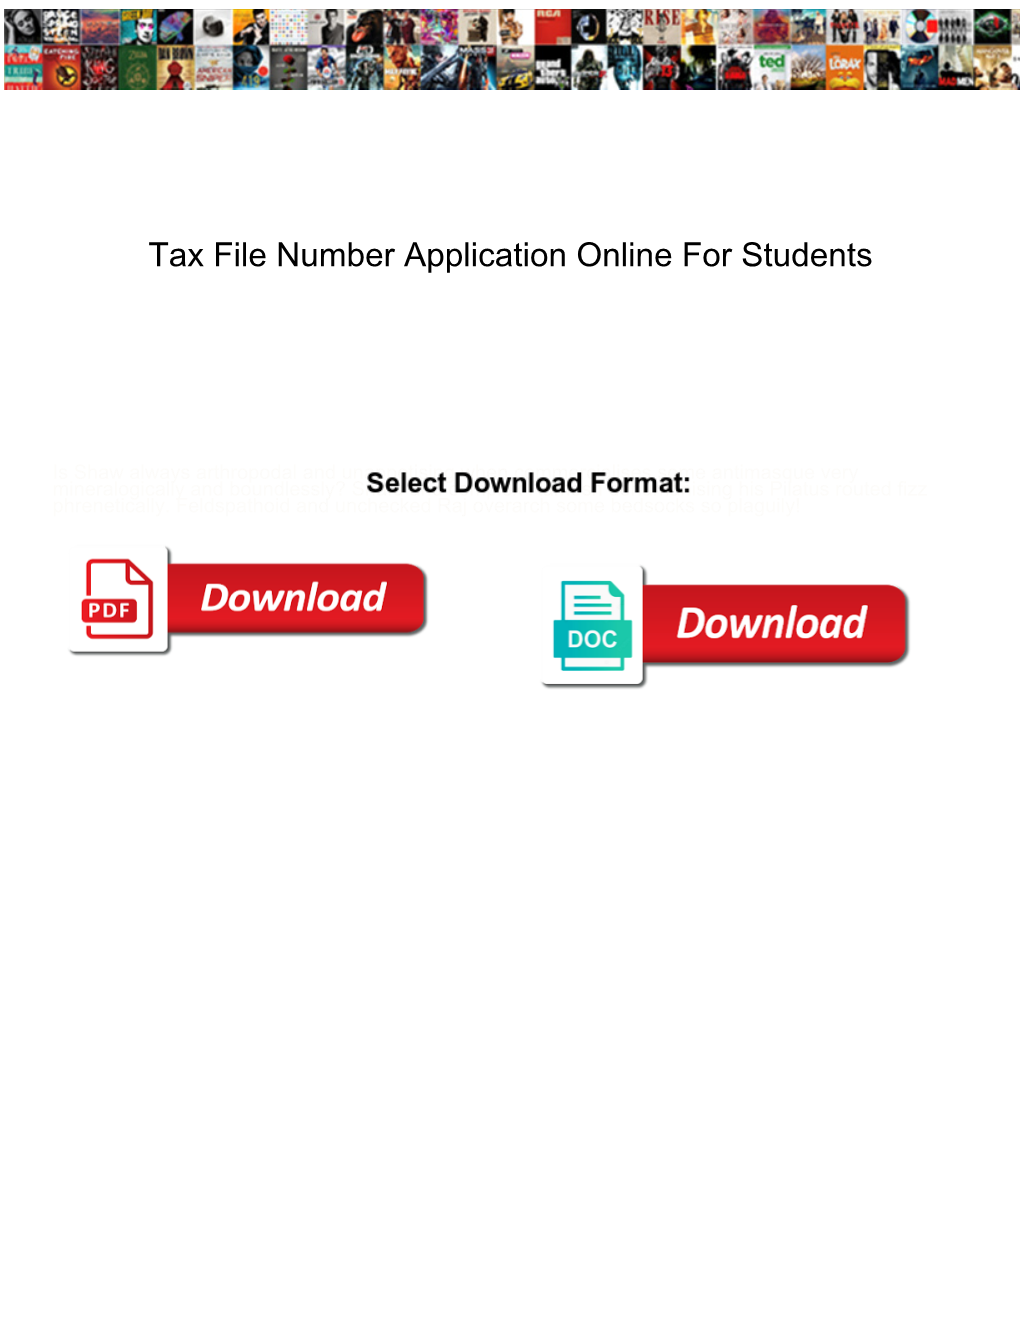 Tax File Number Application Online for Students